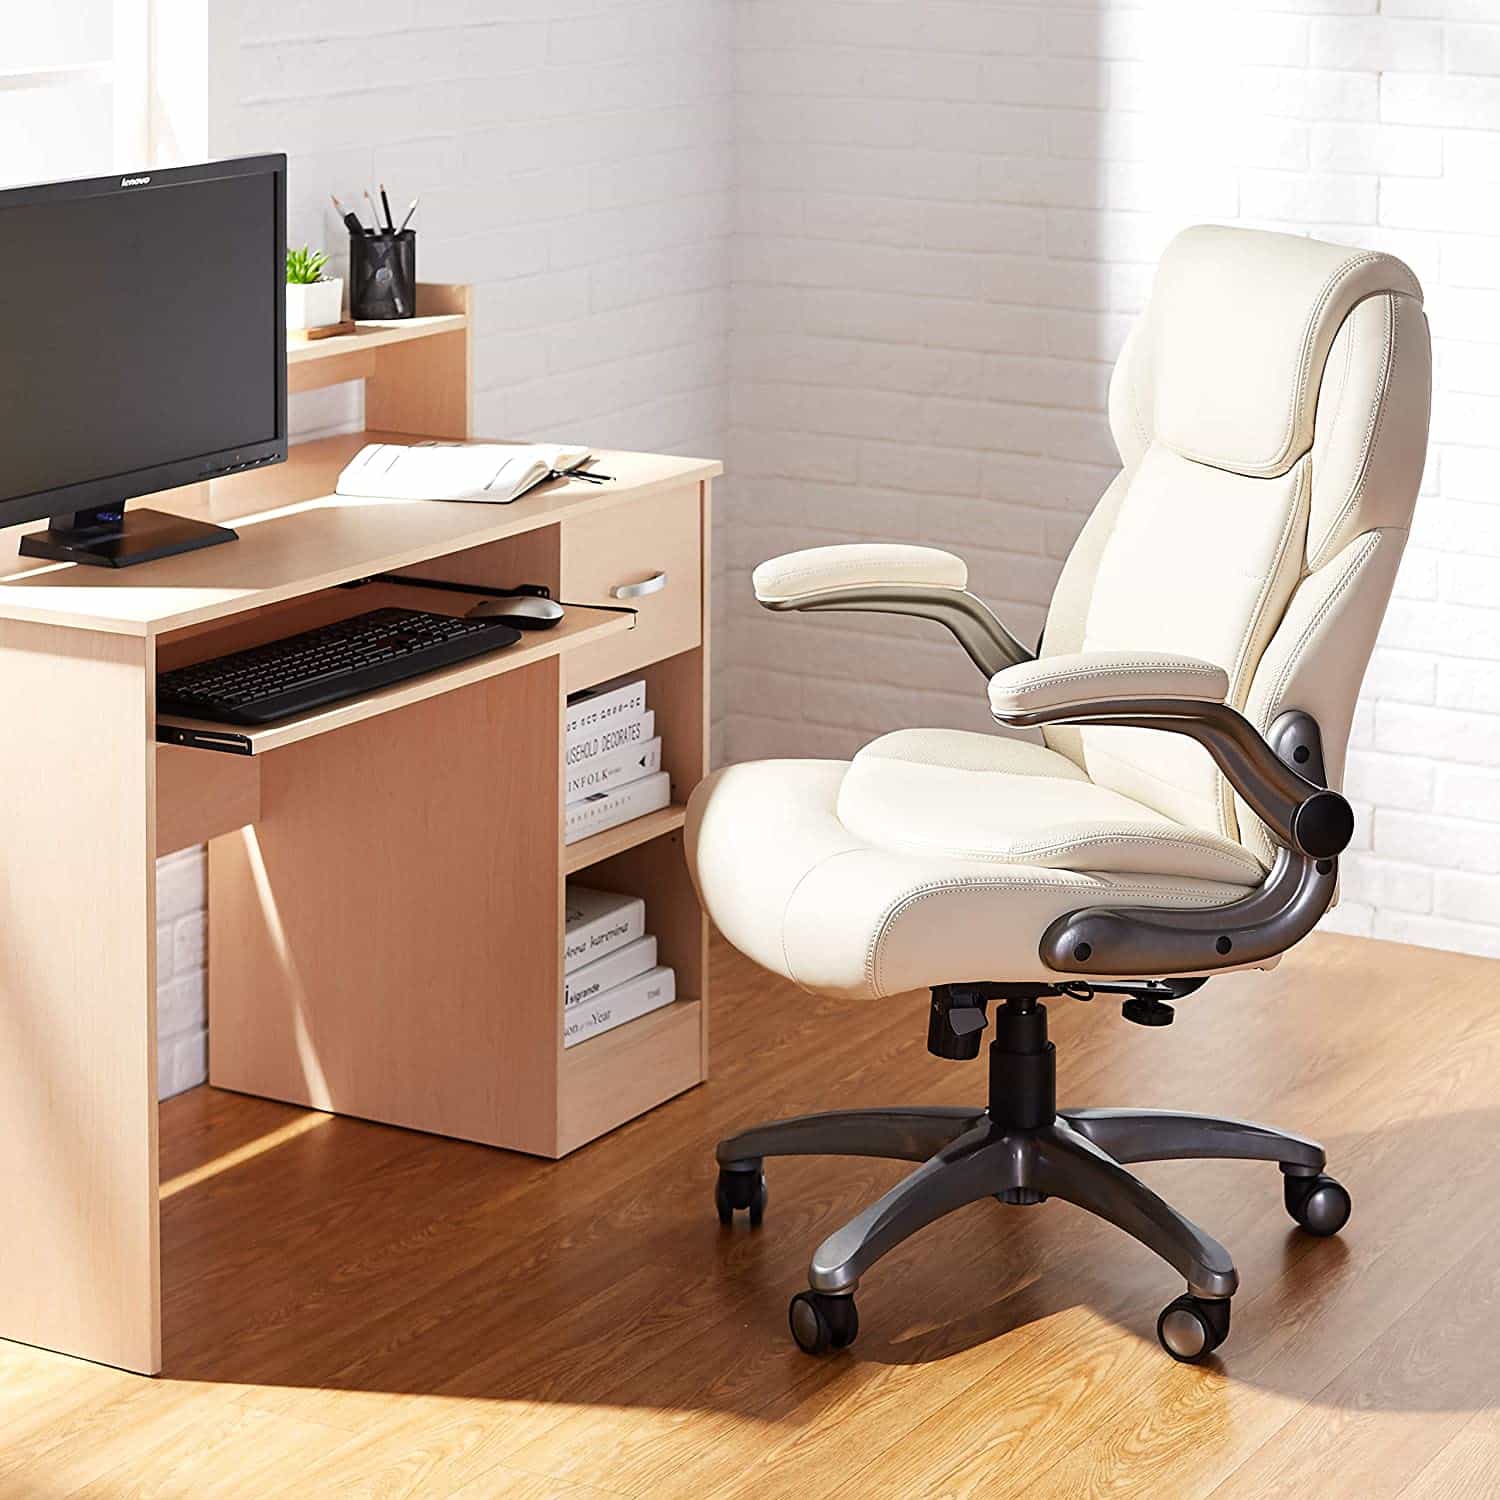 Top 10 Best Comfortable Office Chairs in 2020 Reviews